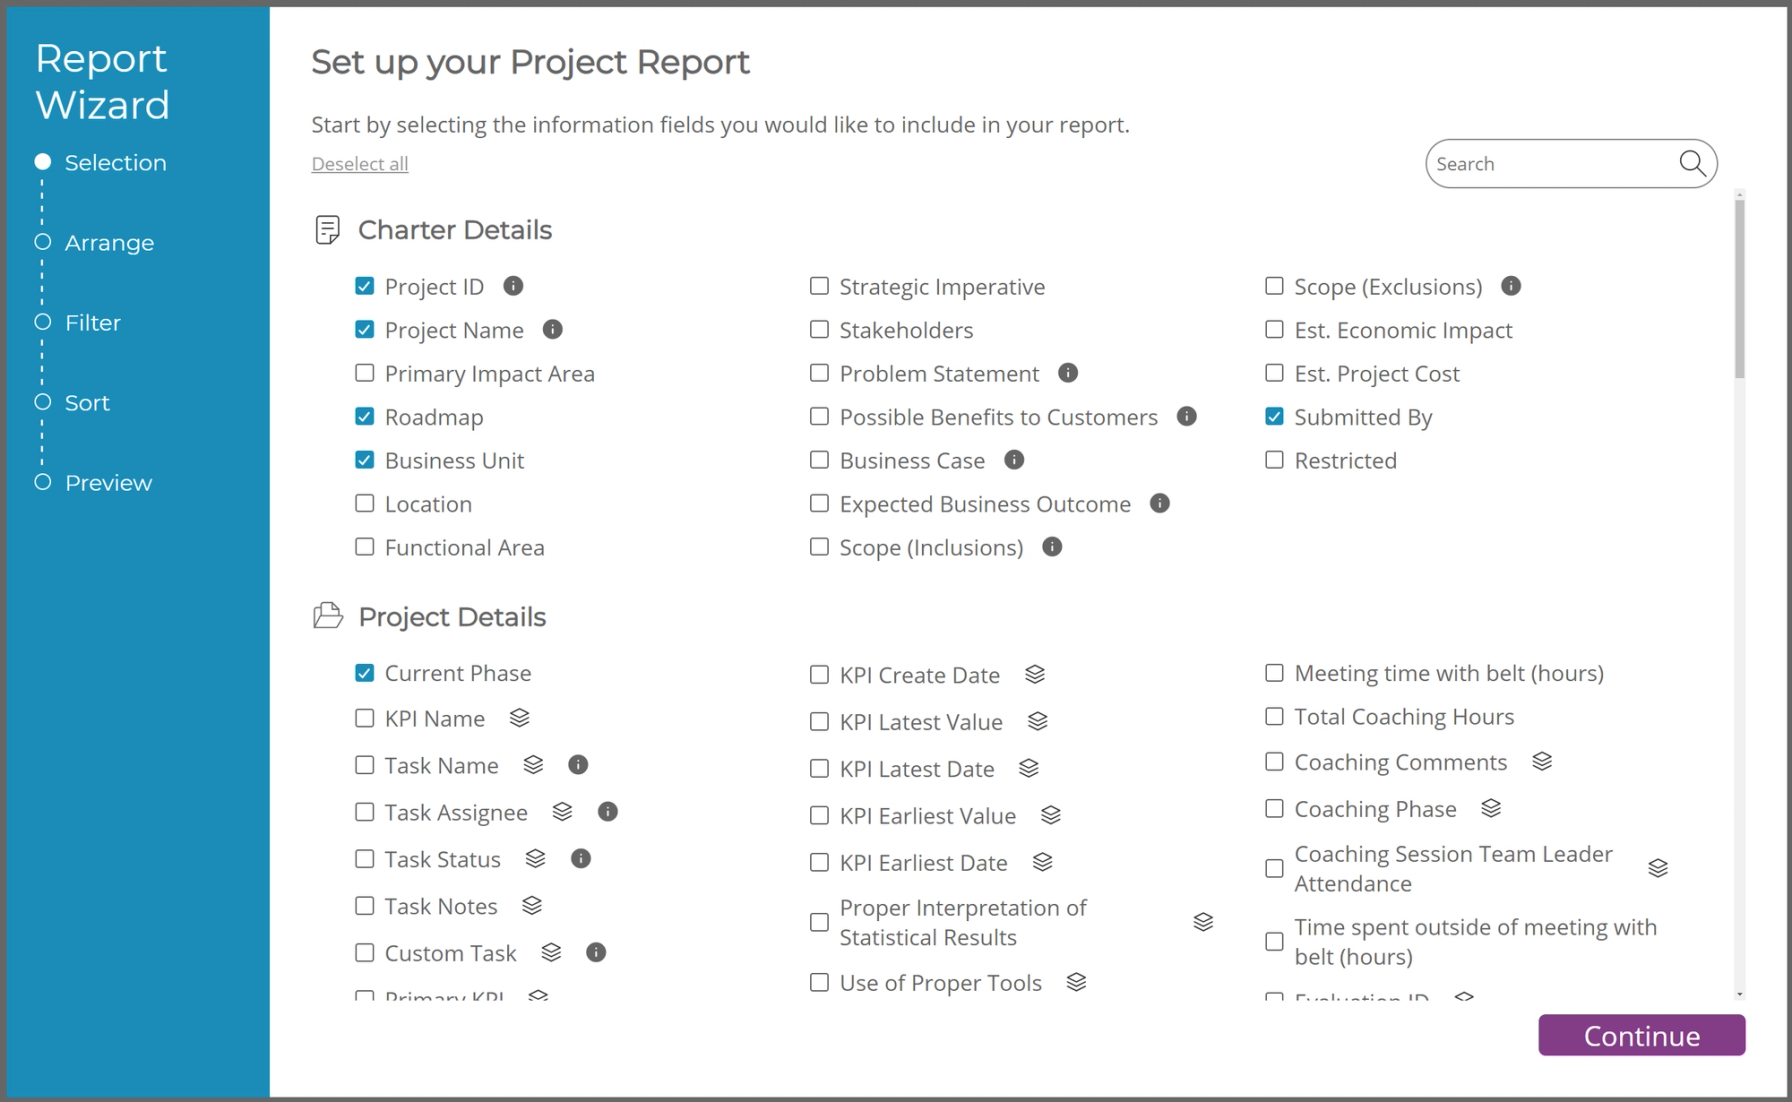 Selecting charter details and project details for a report